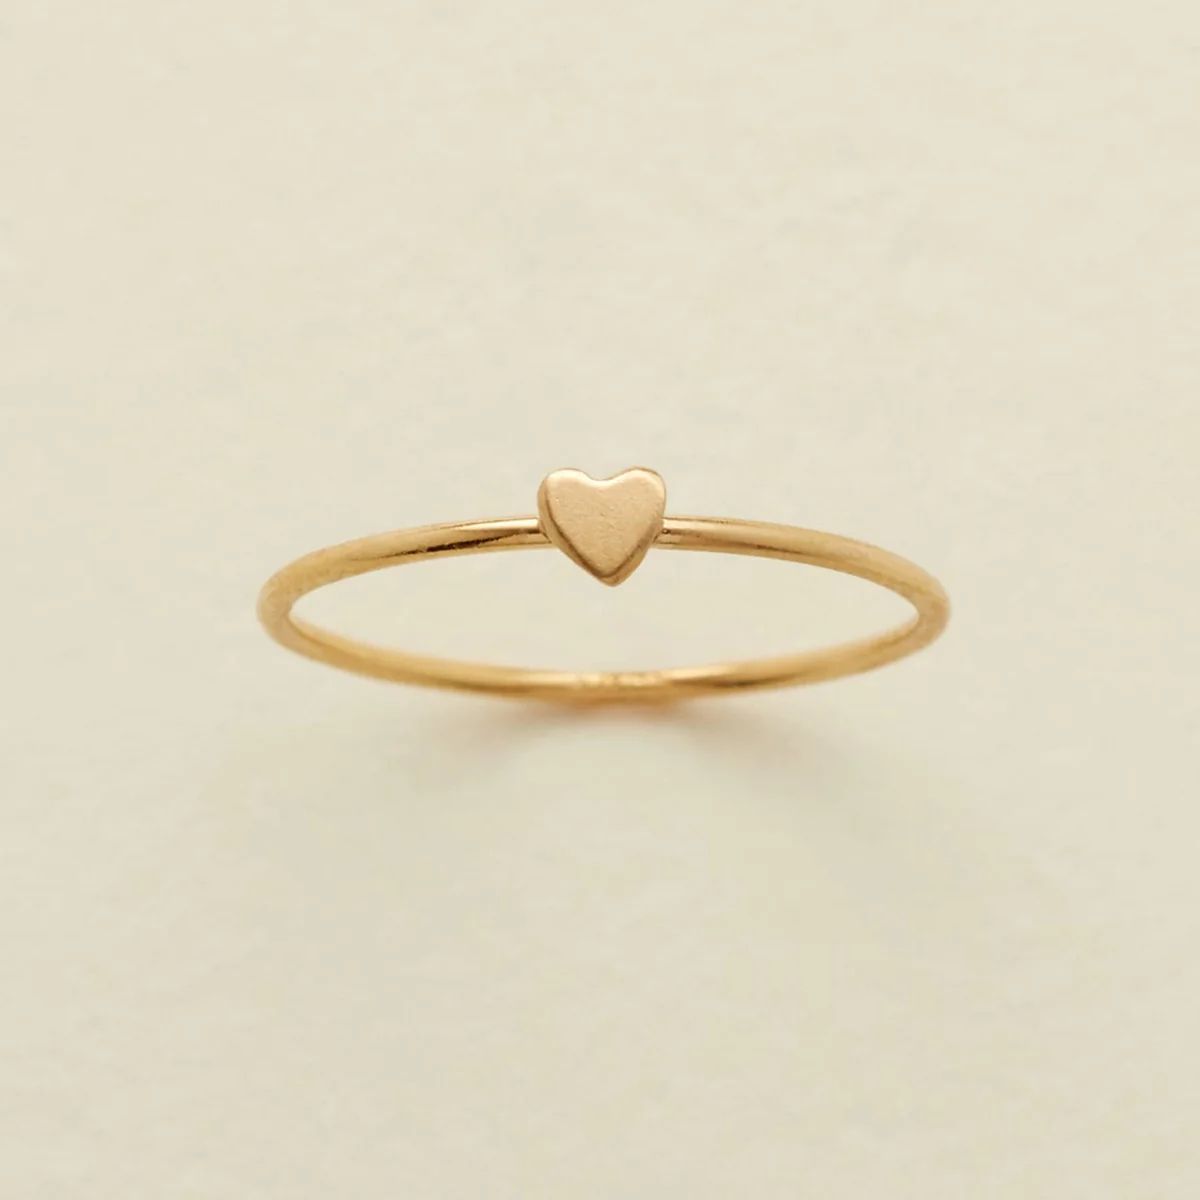 Made By Mary Heart Stacking Ring | Handmade, A Reminder Of Self-Love | Made by Mary (US)